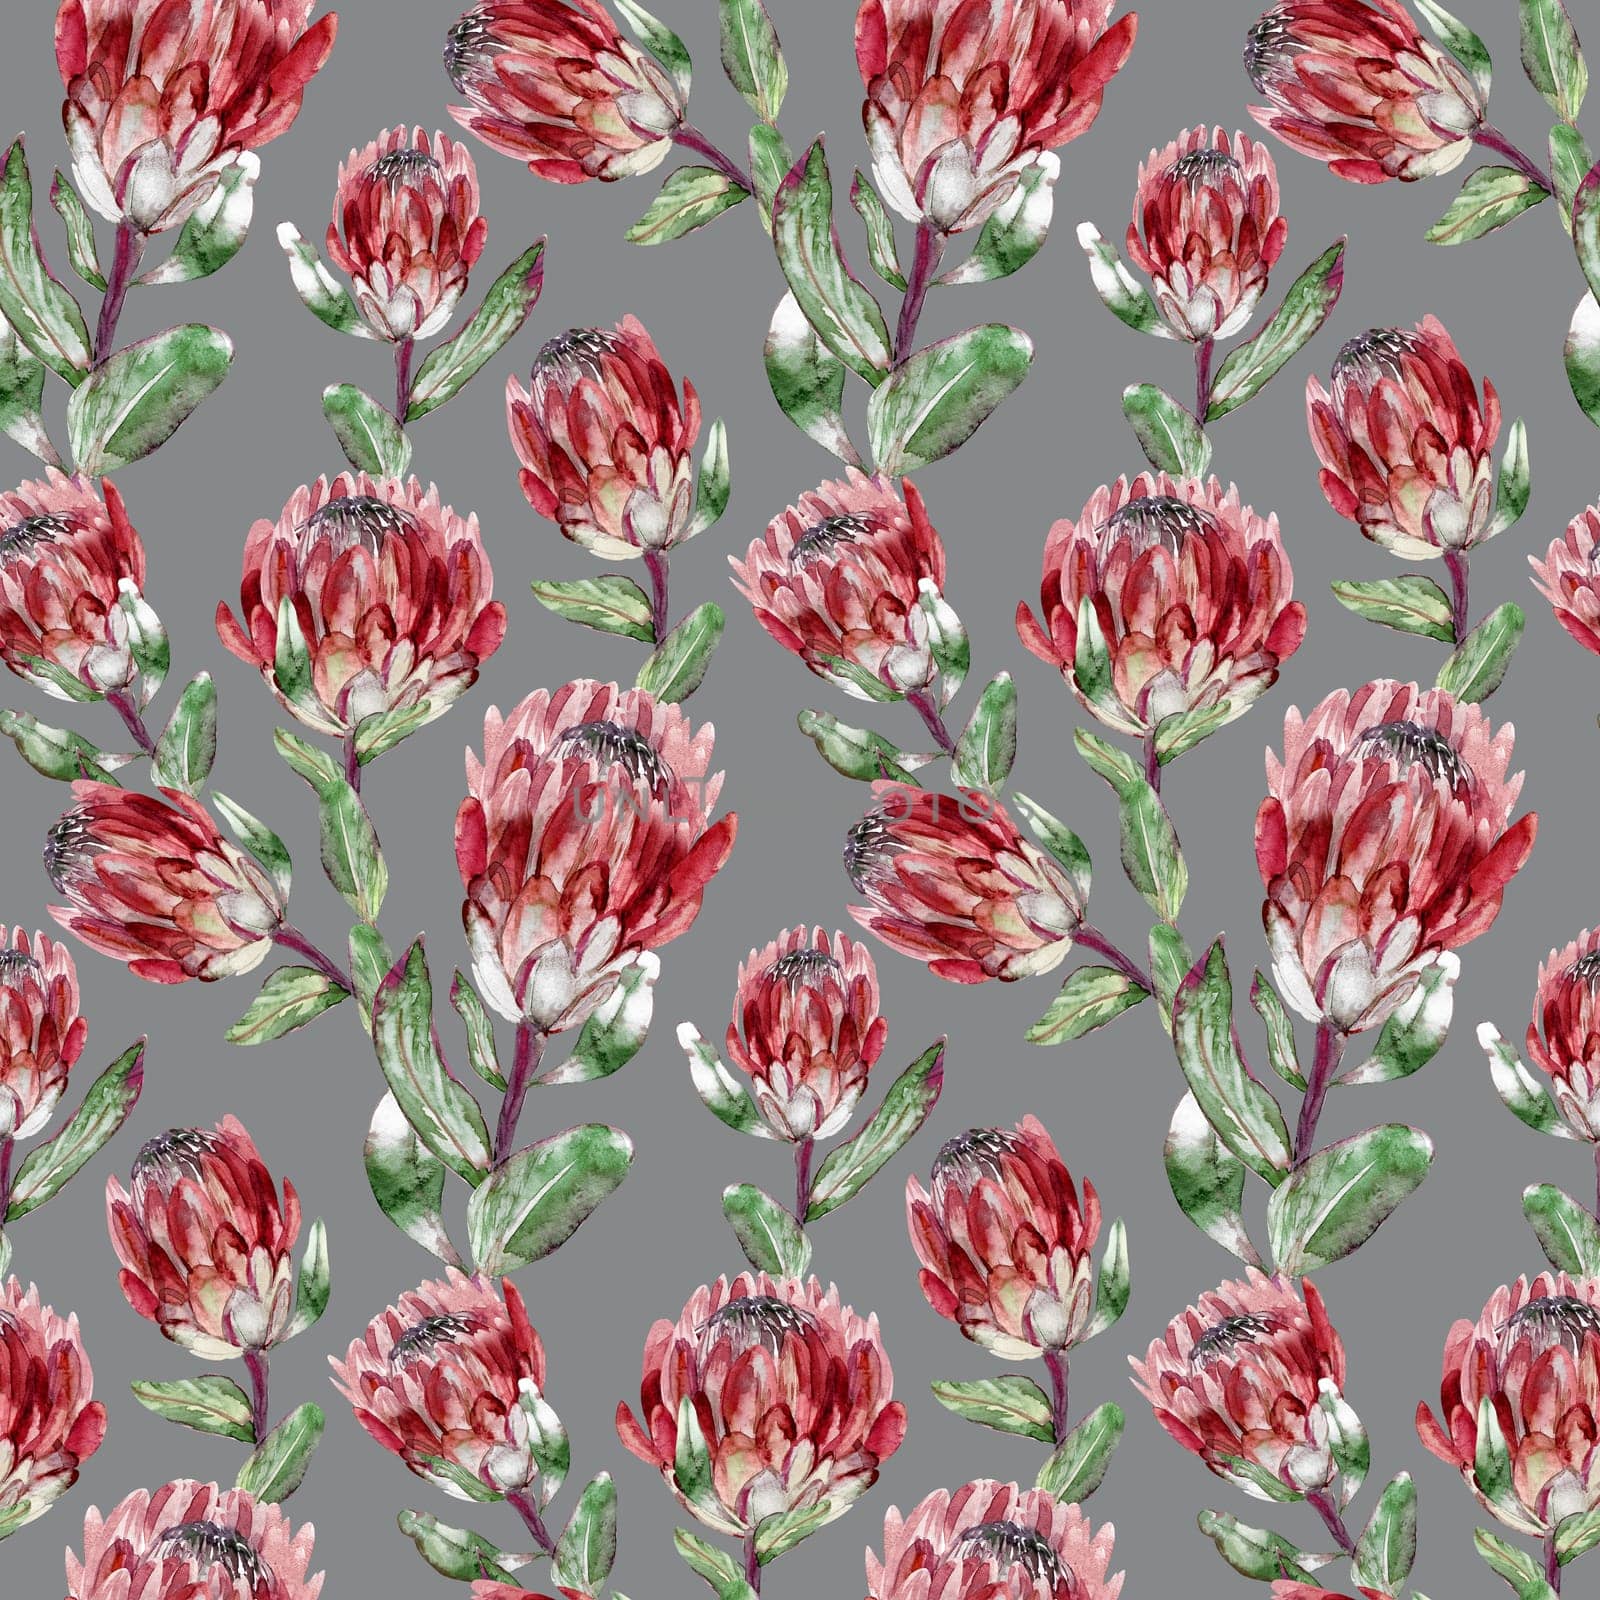 Seamless watercolor pattern with vertical protea flowers for textile and surface design